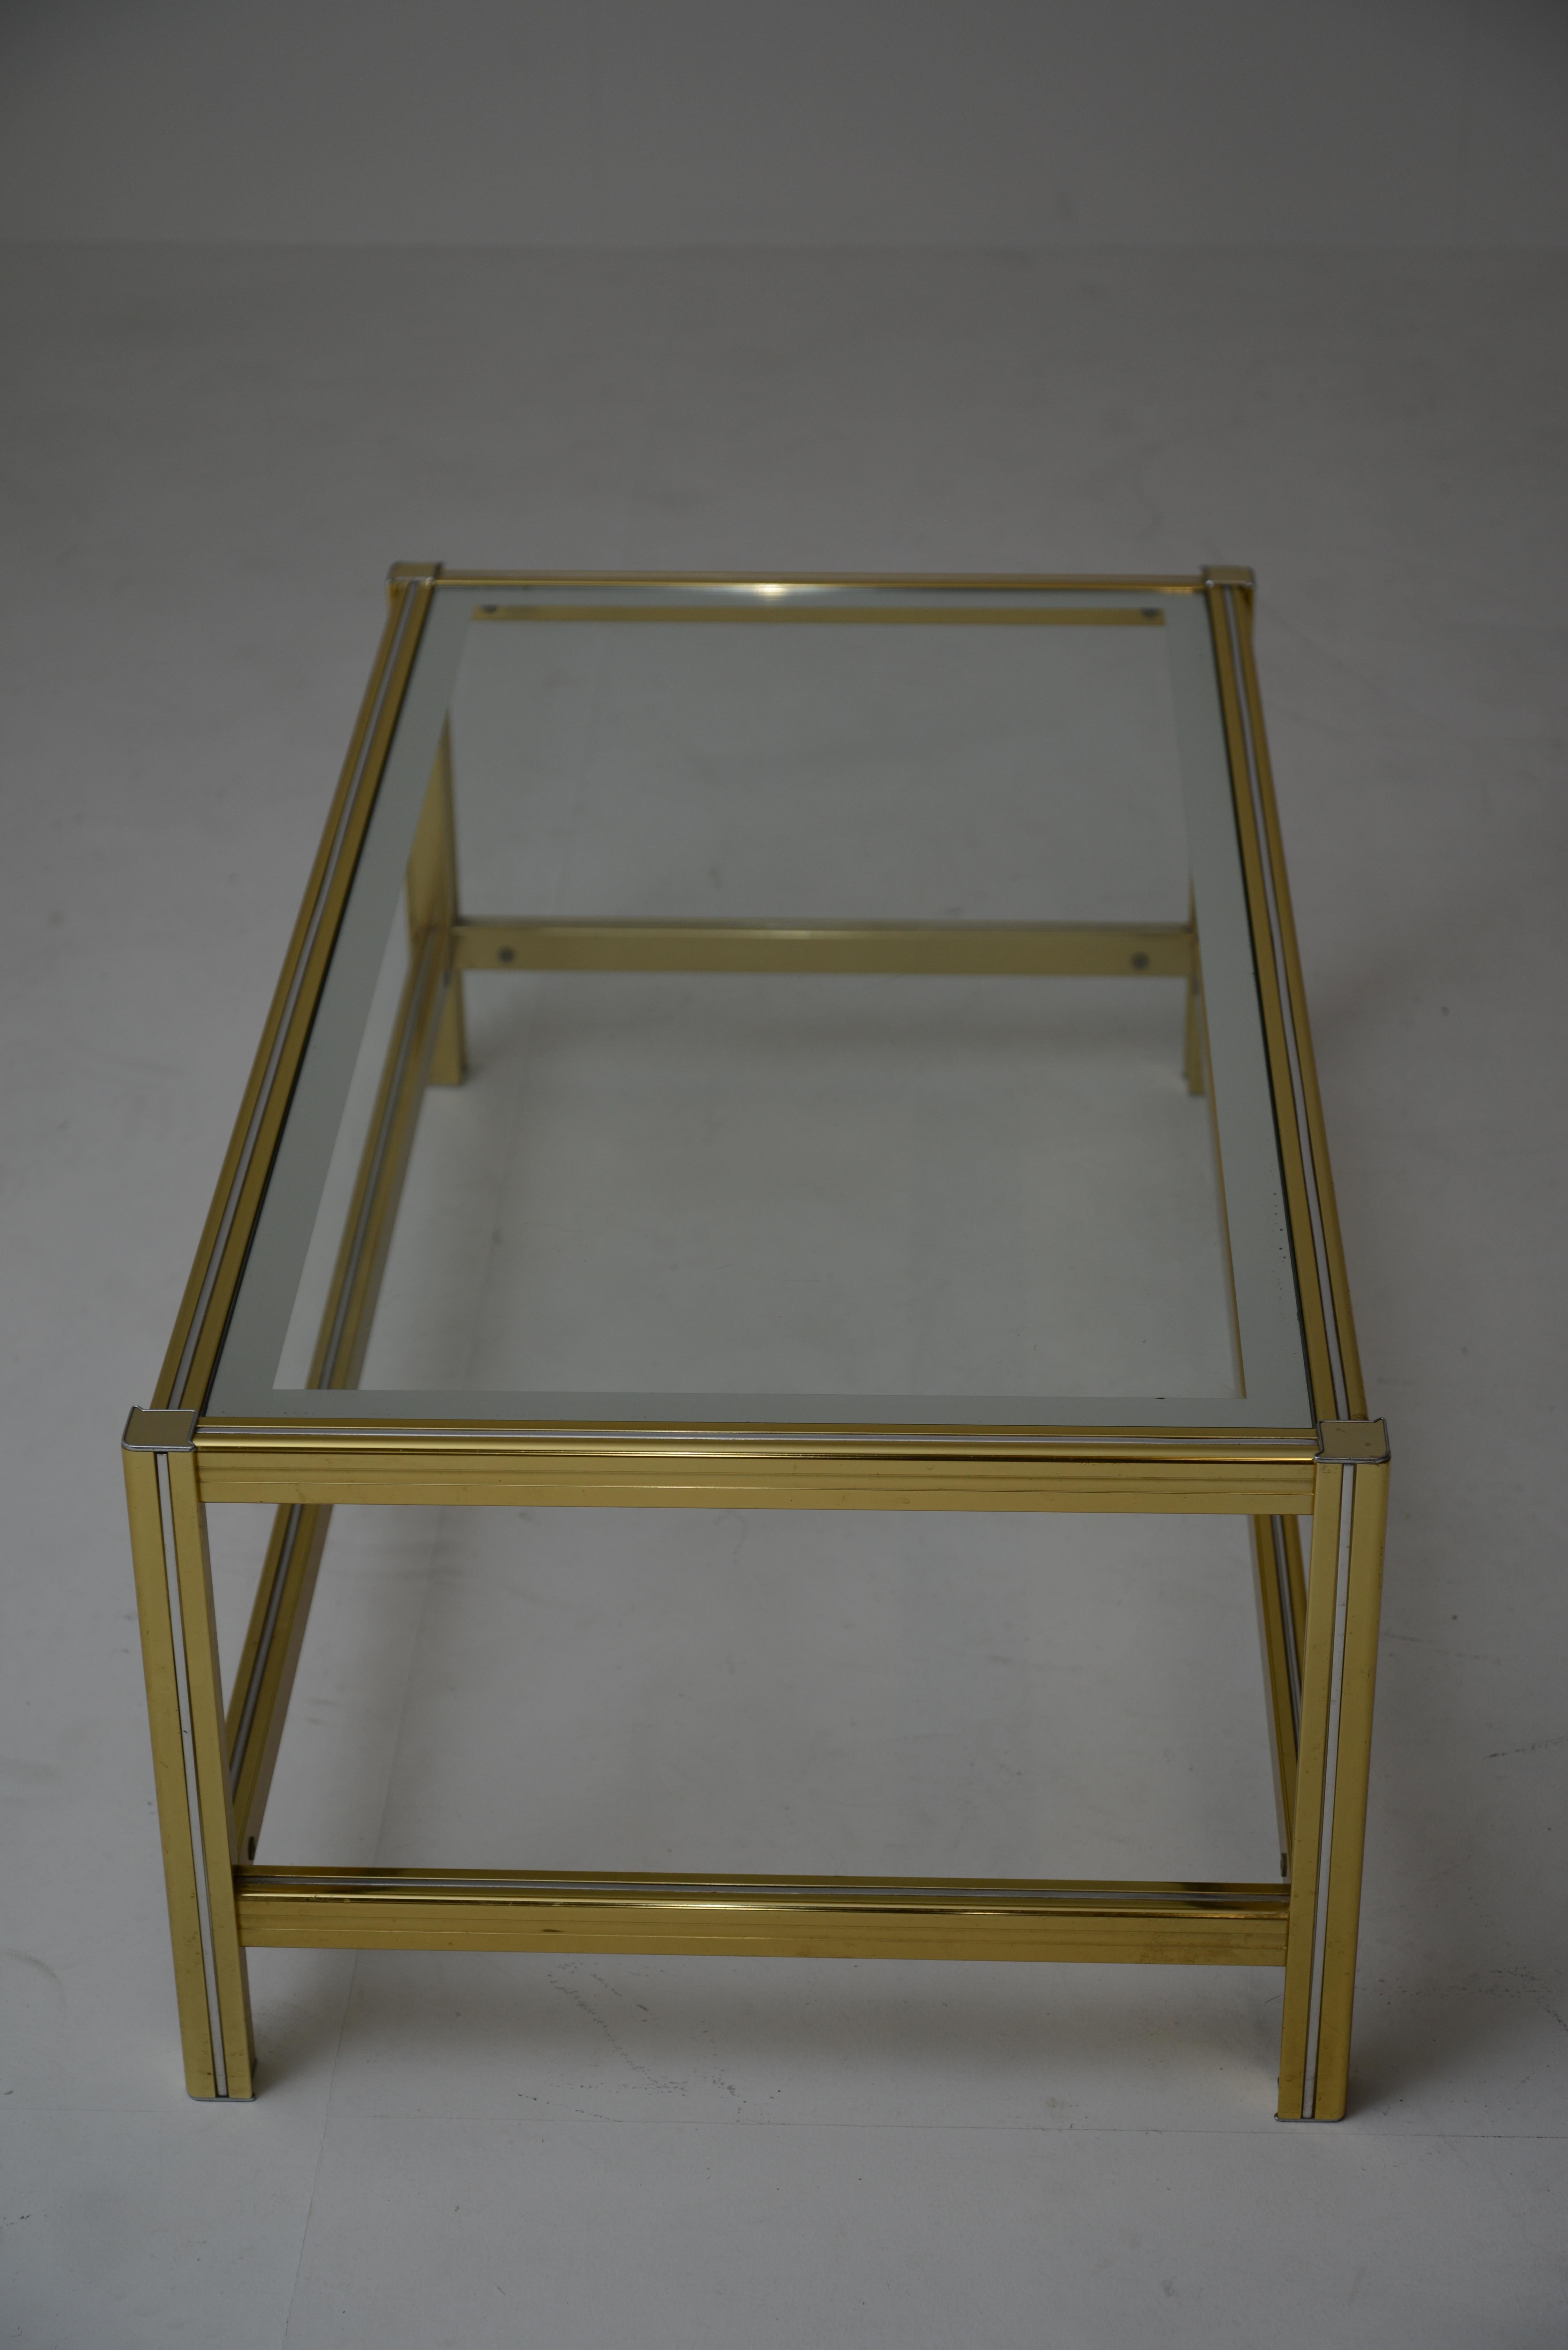 Late 20th Century Mid-Century Modern Italian Brass and Glass Coffee Table, 1970s